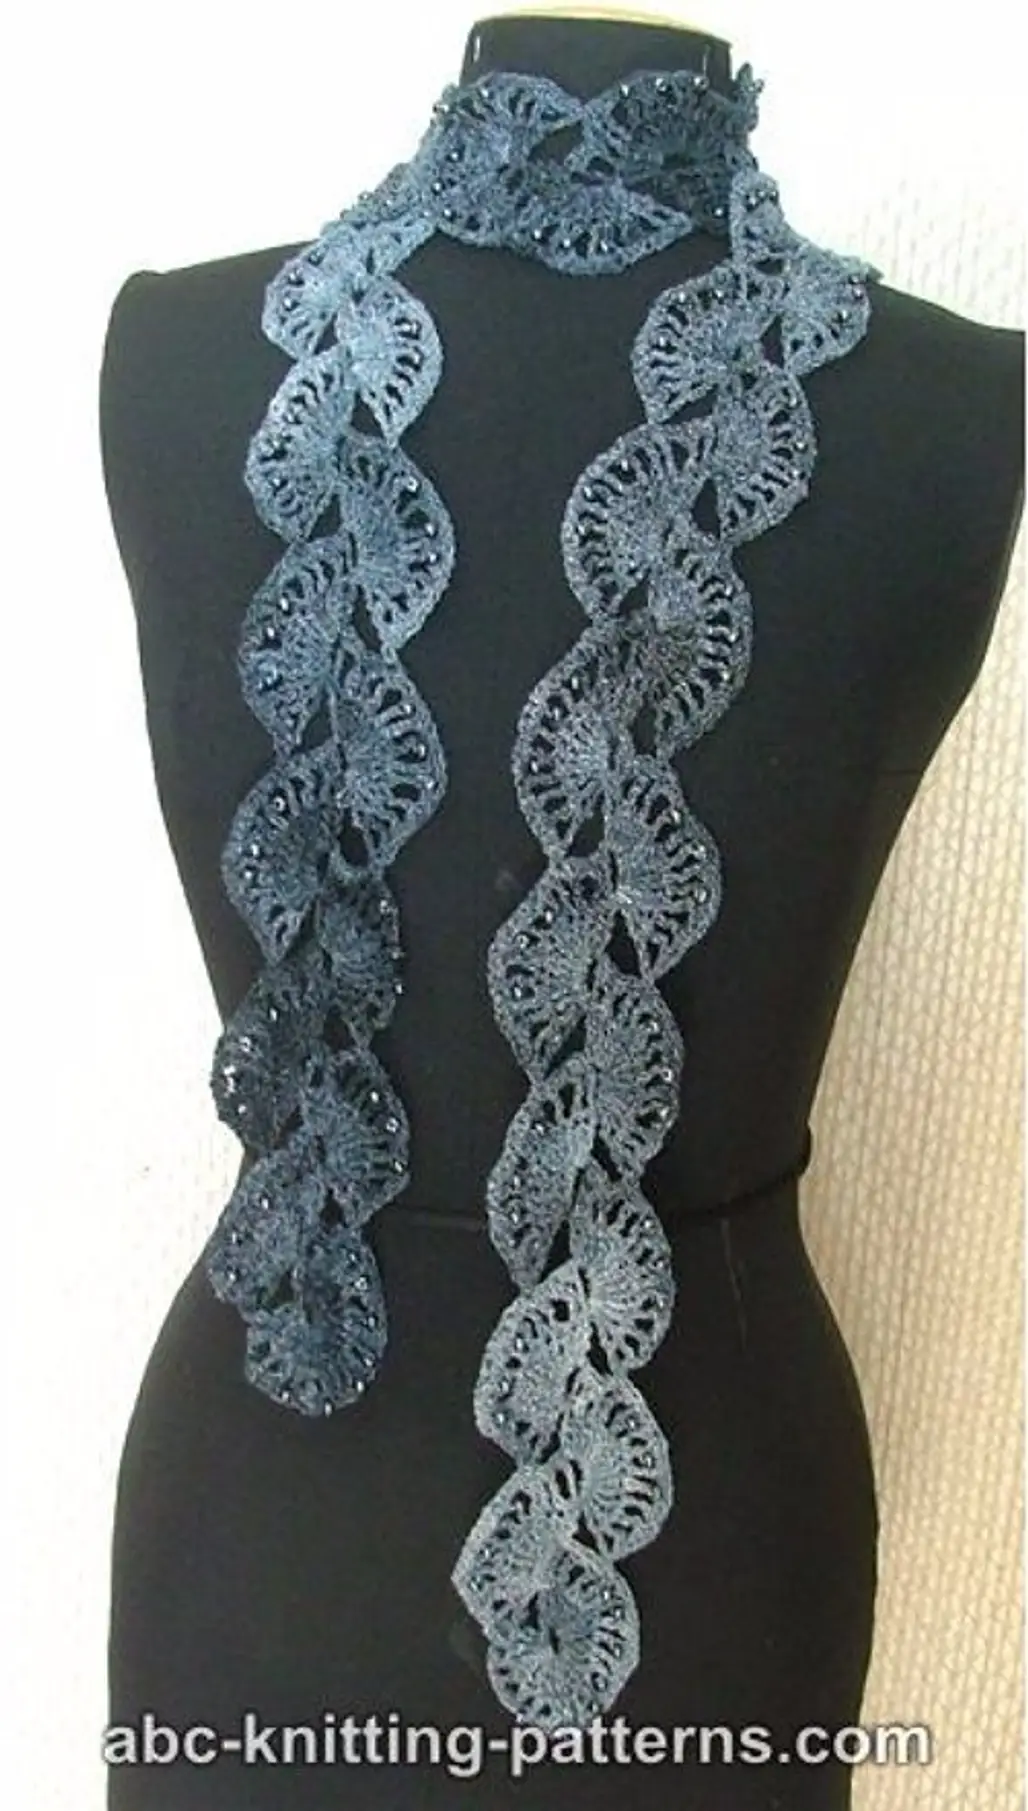 Elegant Ribbon Lace Scarf with Beads